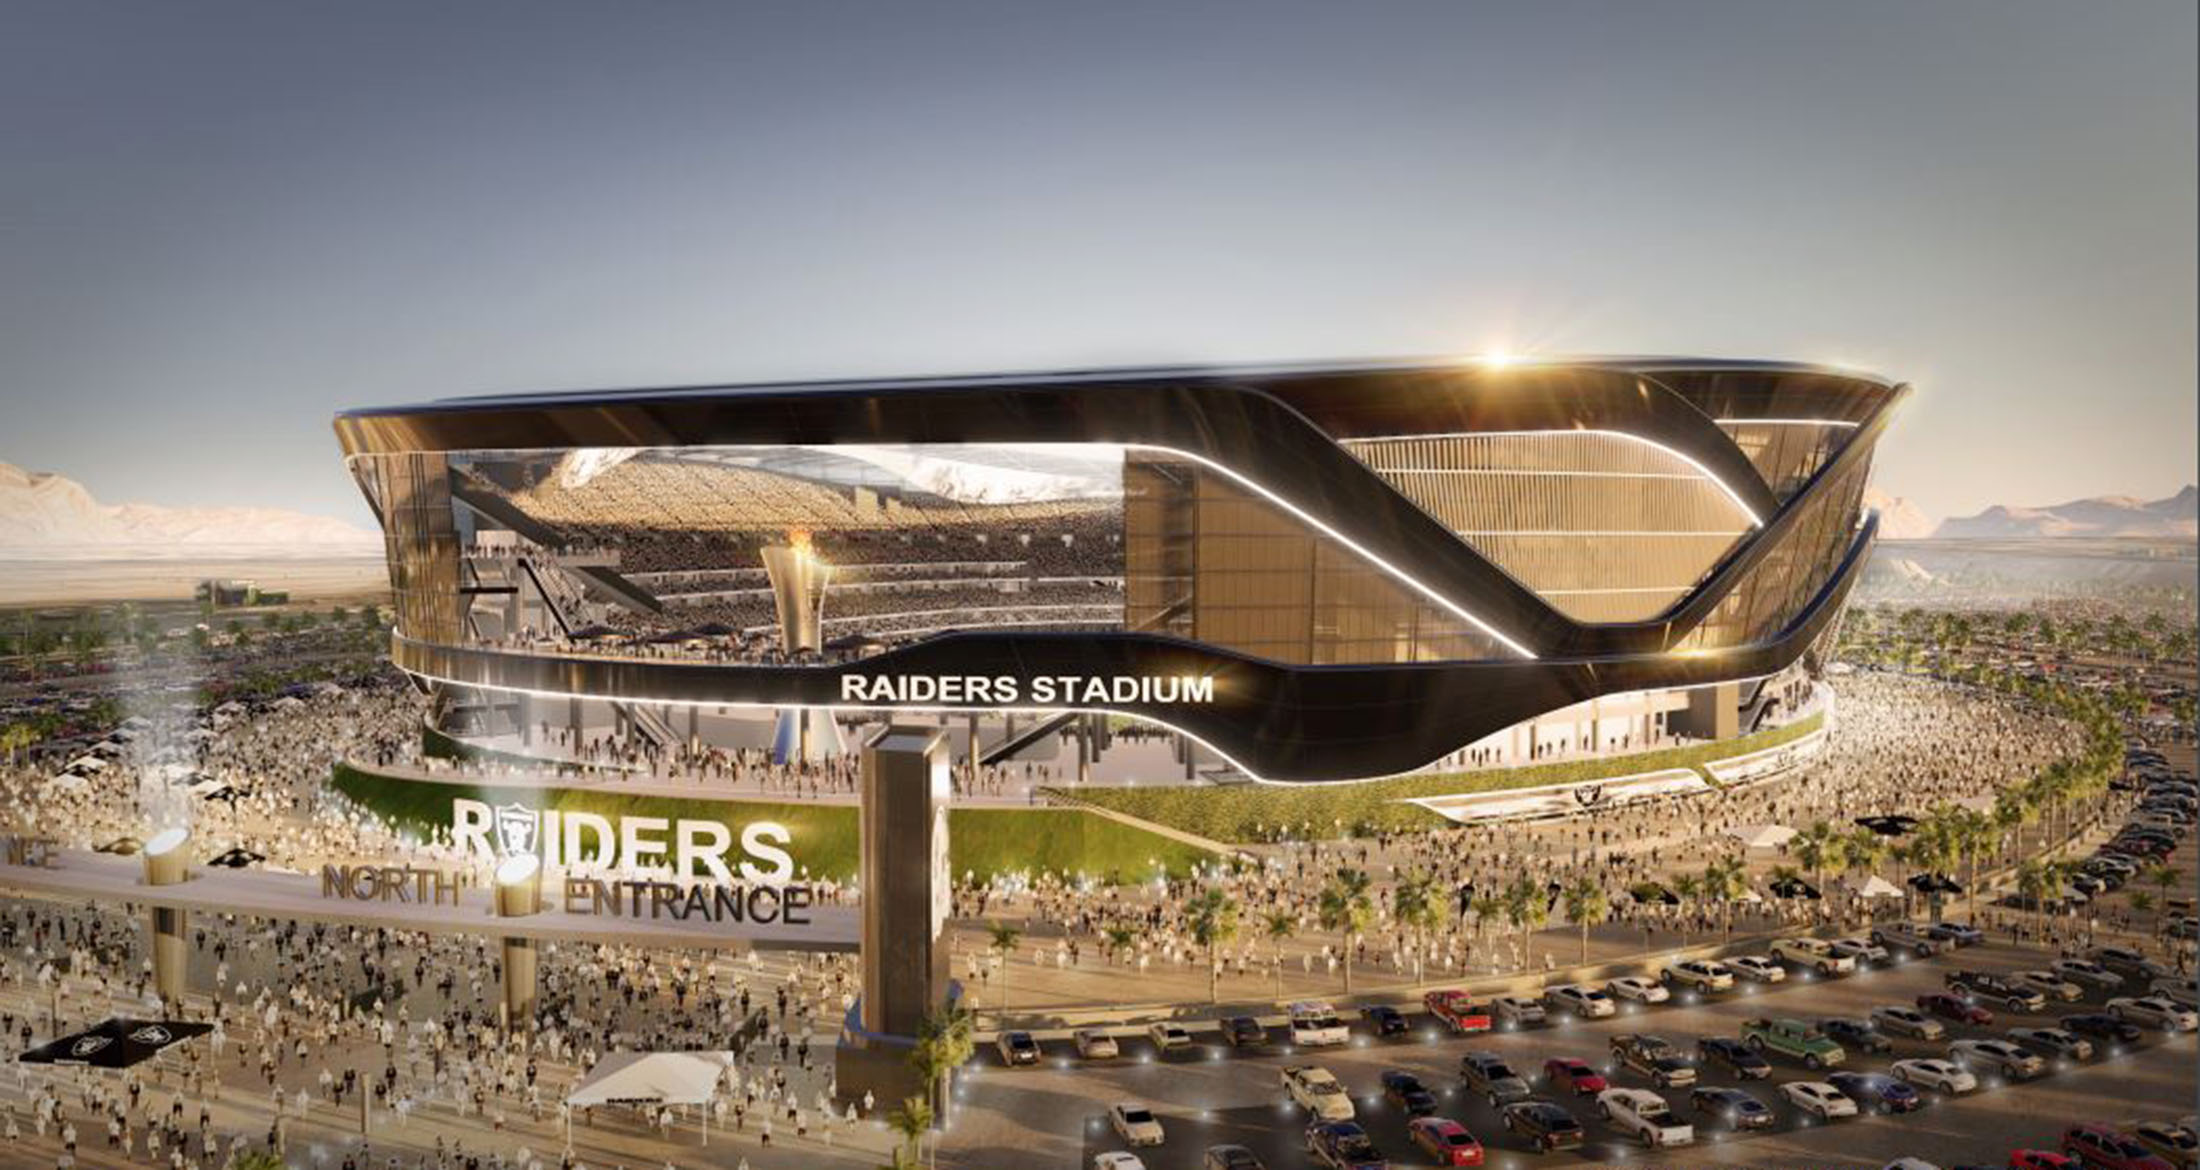 It's official: NFL owners approve Raiders' move to Las Vegas